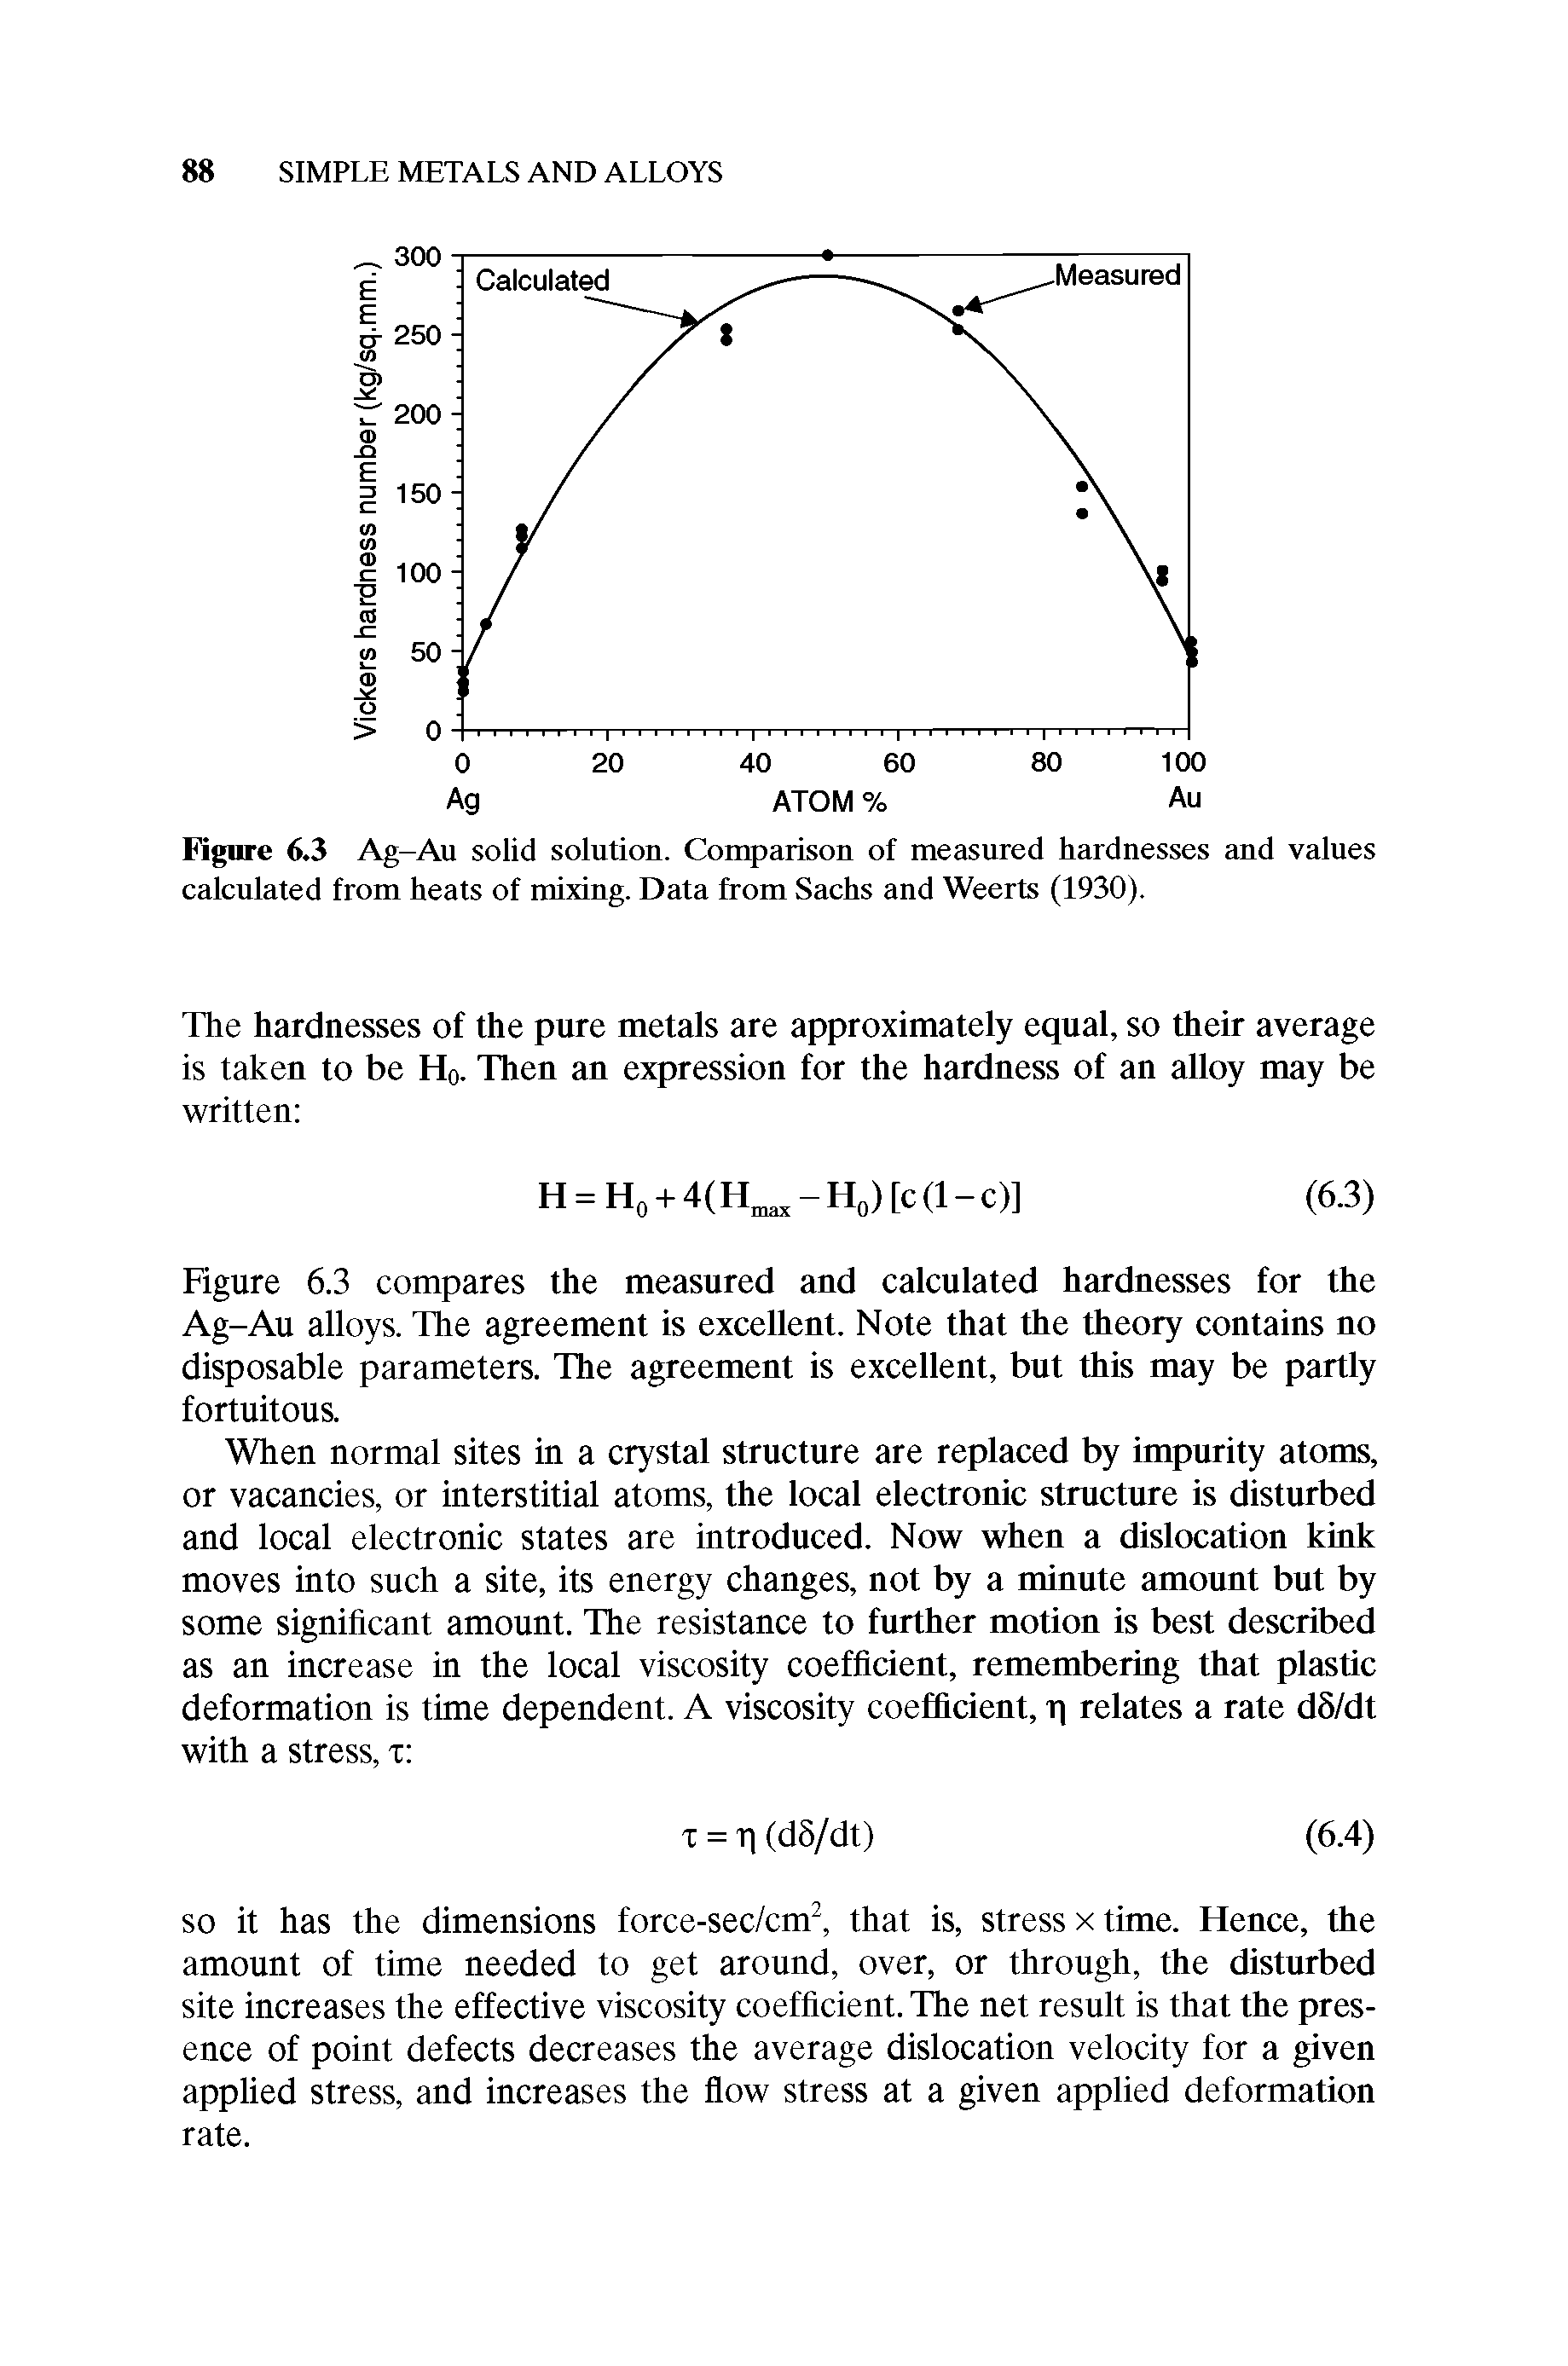 Figure 6.3 Ag-Au solid solution. Comparison of measured hardnesses and values calculated from heats of mixing. Data from Sachs and Weerts (1930).